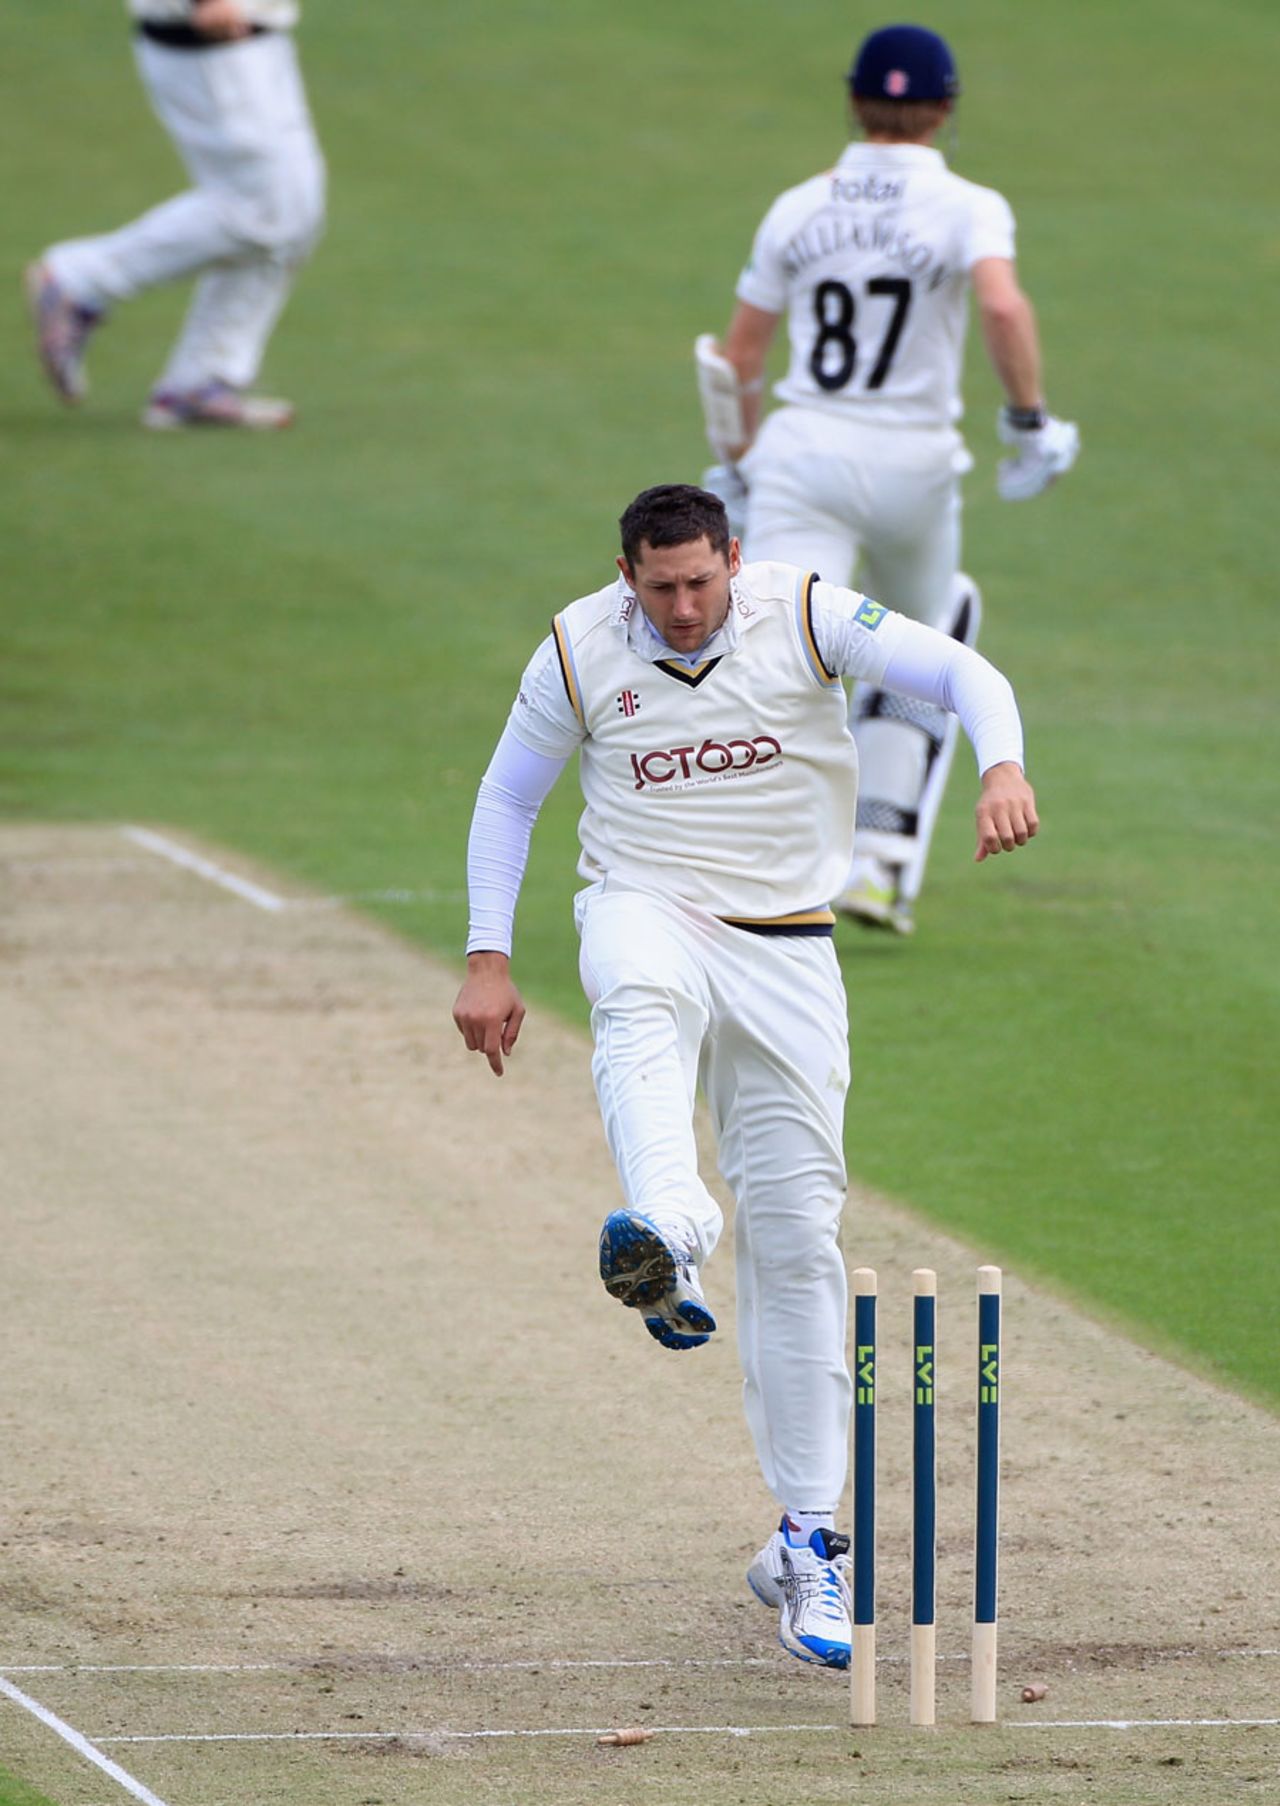 Tim Bresnan expresses frustration at conceding overthrows but he went on to take five wickets, Gloucestershire v Yorkshire, County Championship, Division Two, 3rd day, Bristol, May 11, 2012